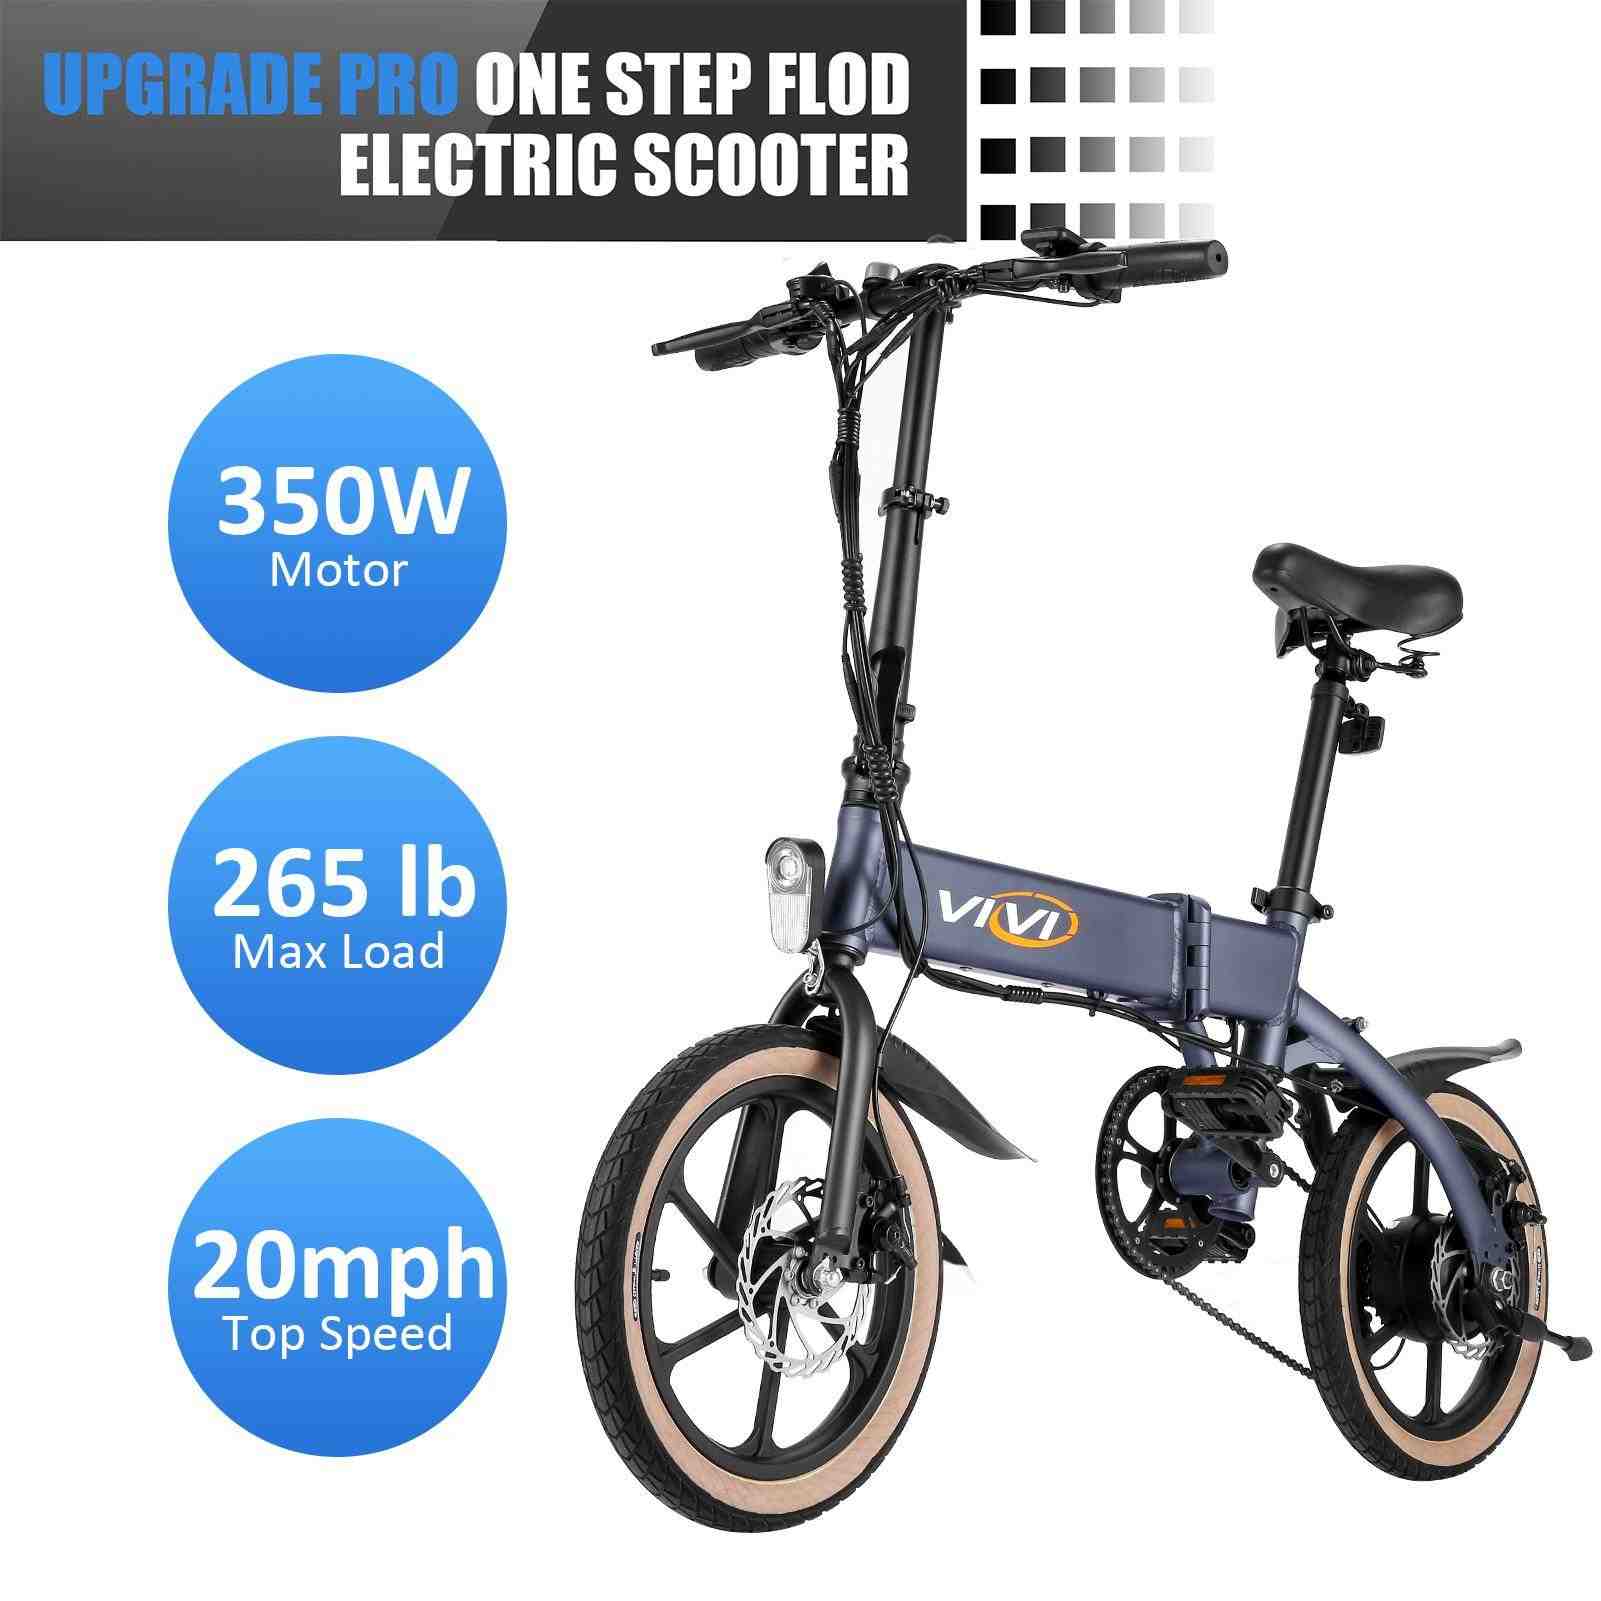 What is the best folding electric bike on the market?